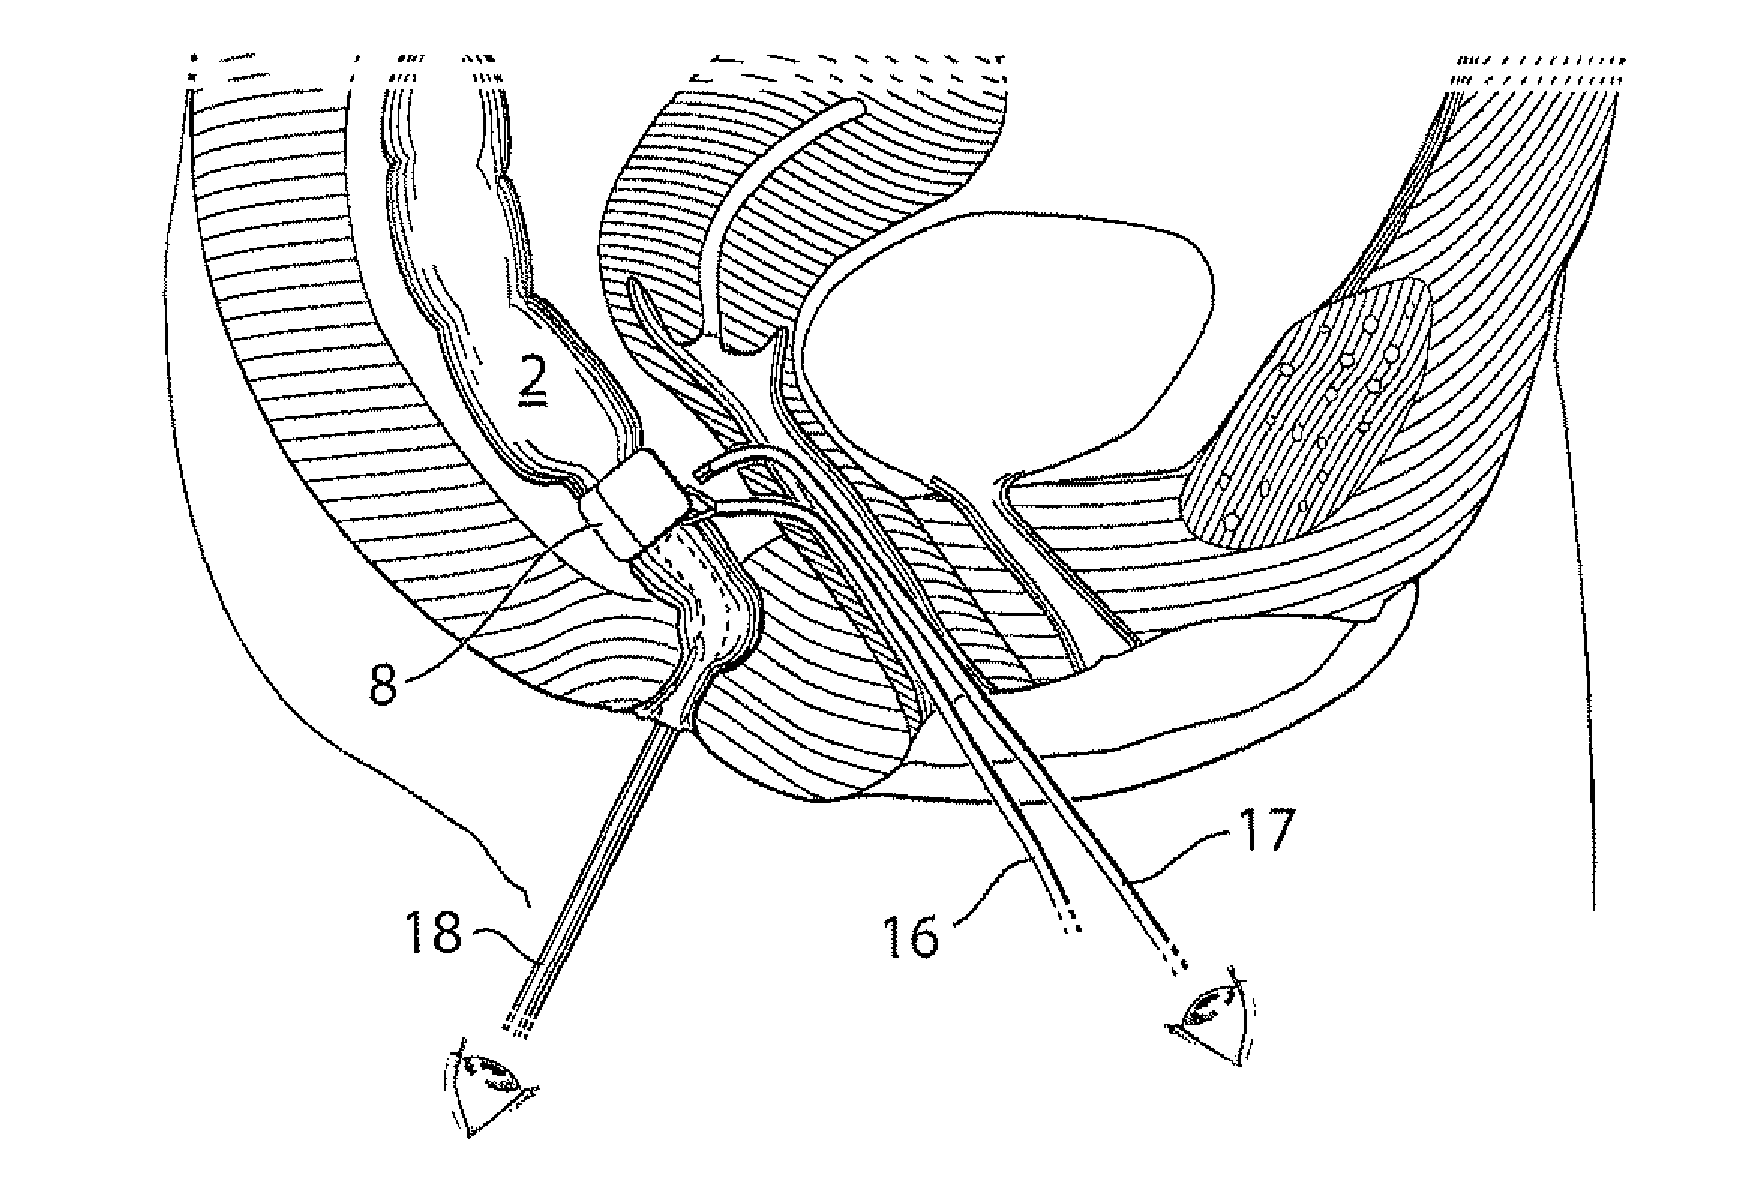 Vaginal operation method for the treatment of anal incontinence in women